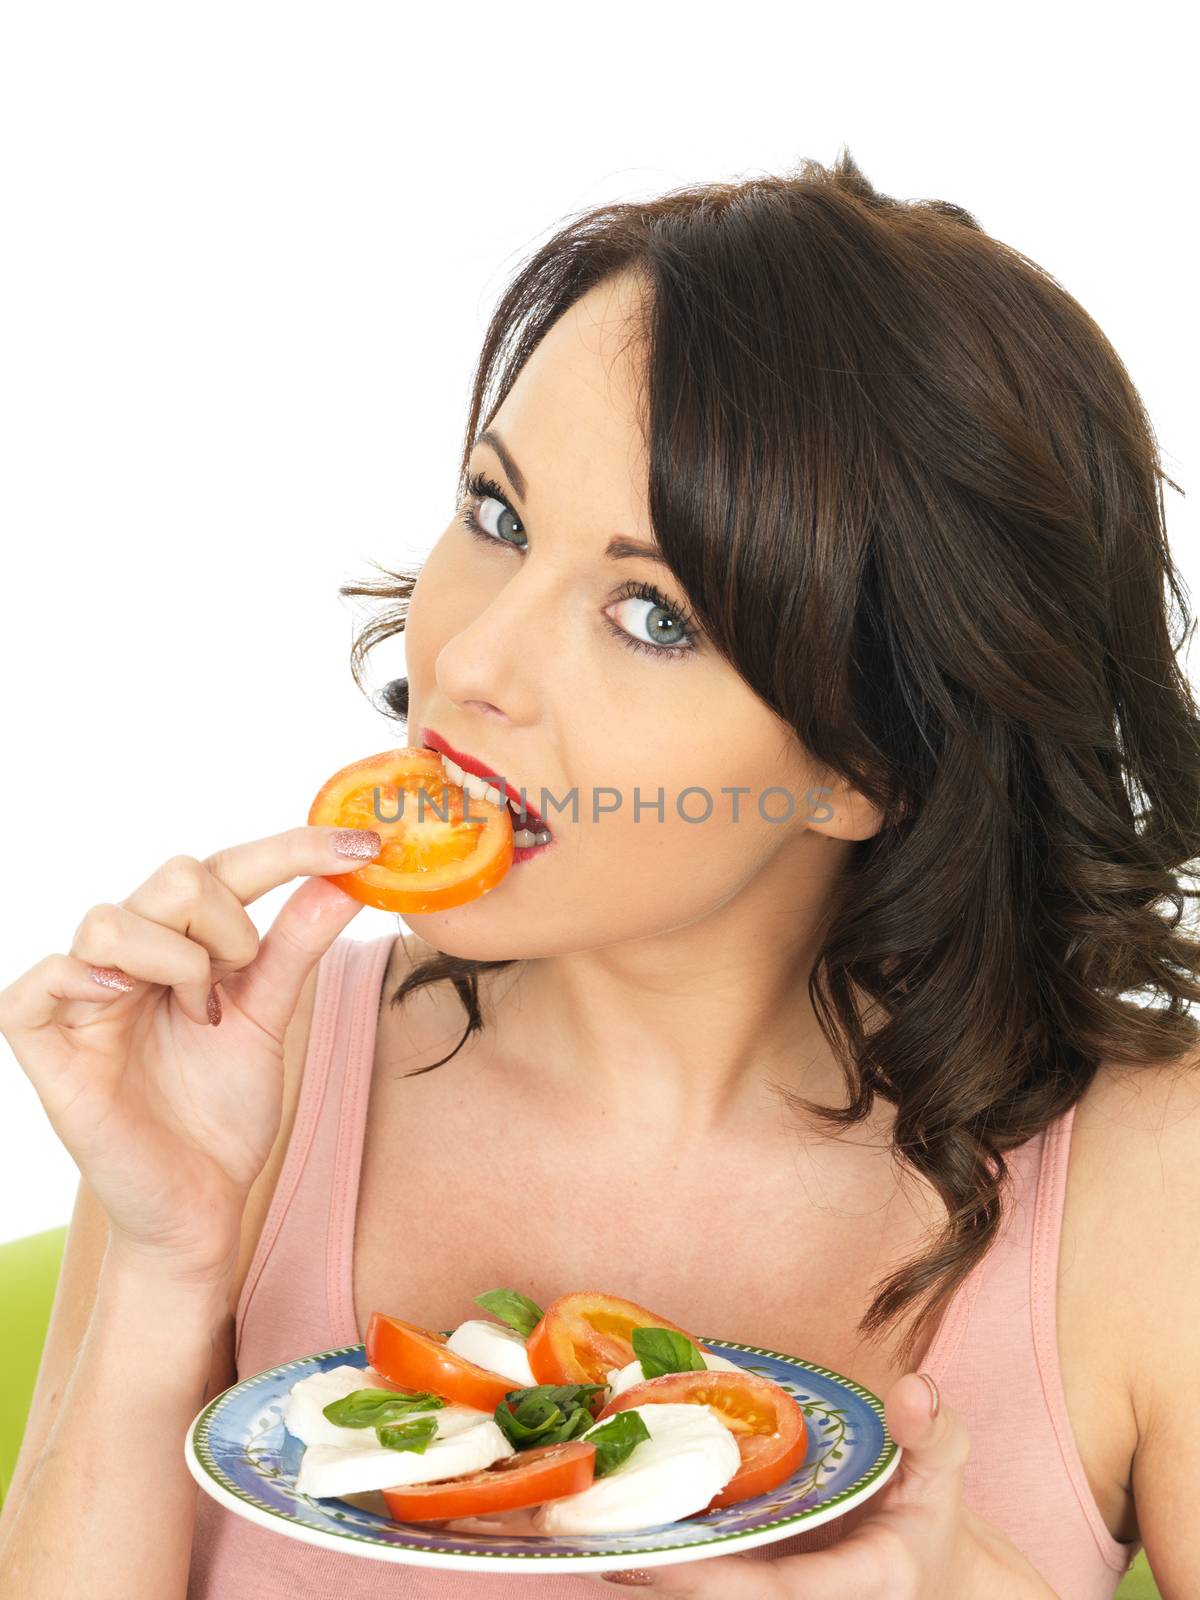 Attractive Healthy Young Woman  Eating A Slice of Tomato Looking At The Camera